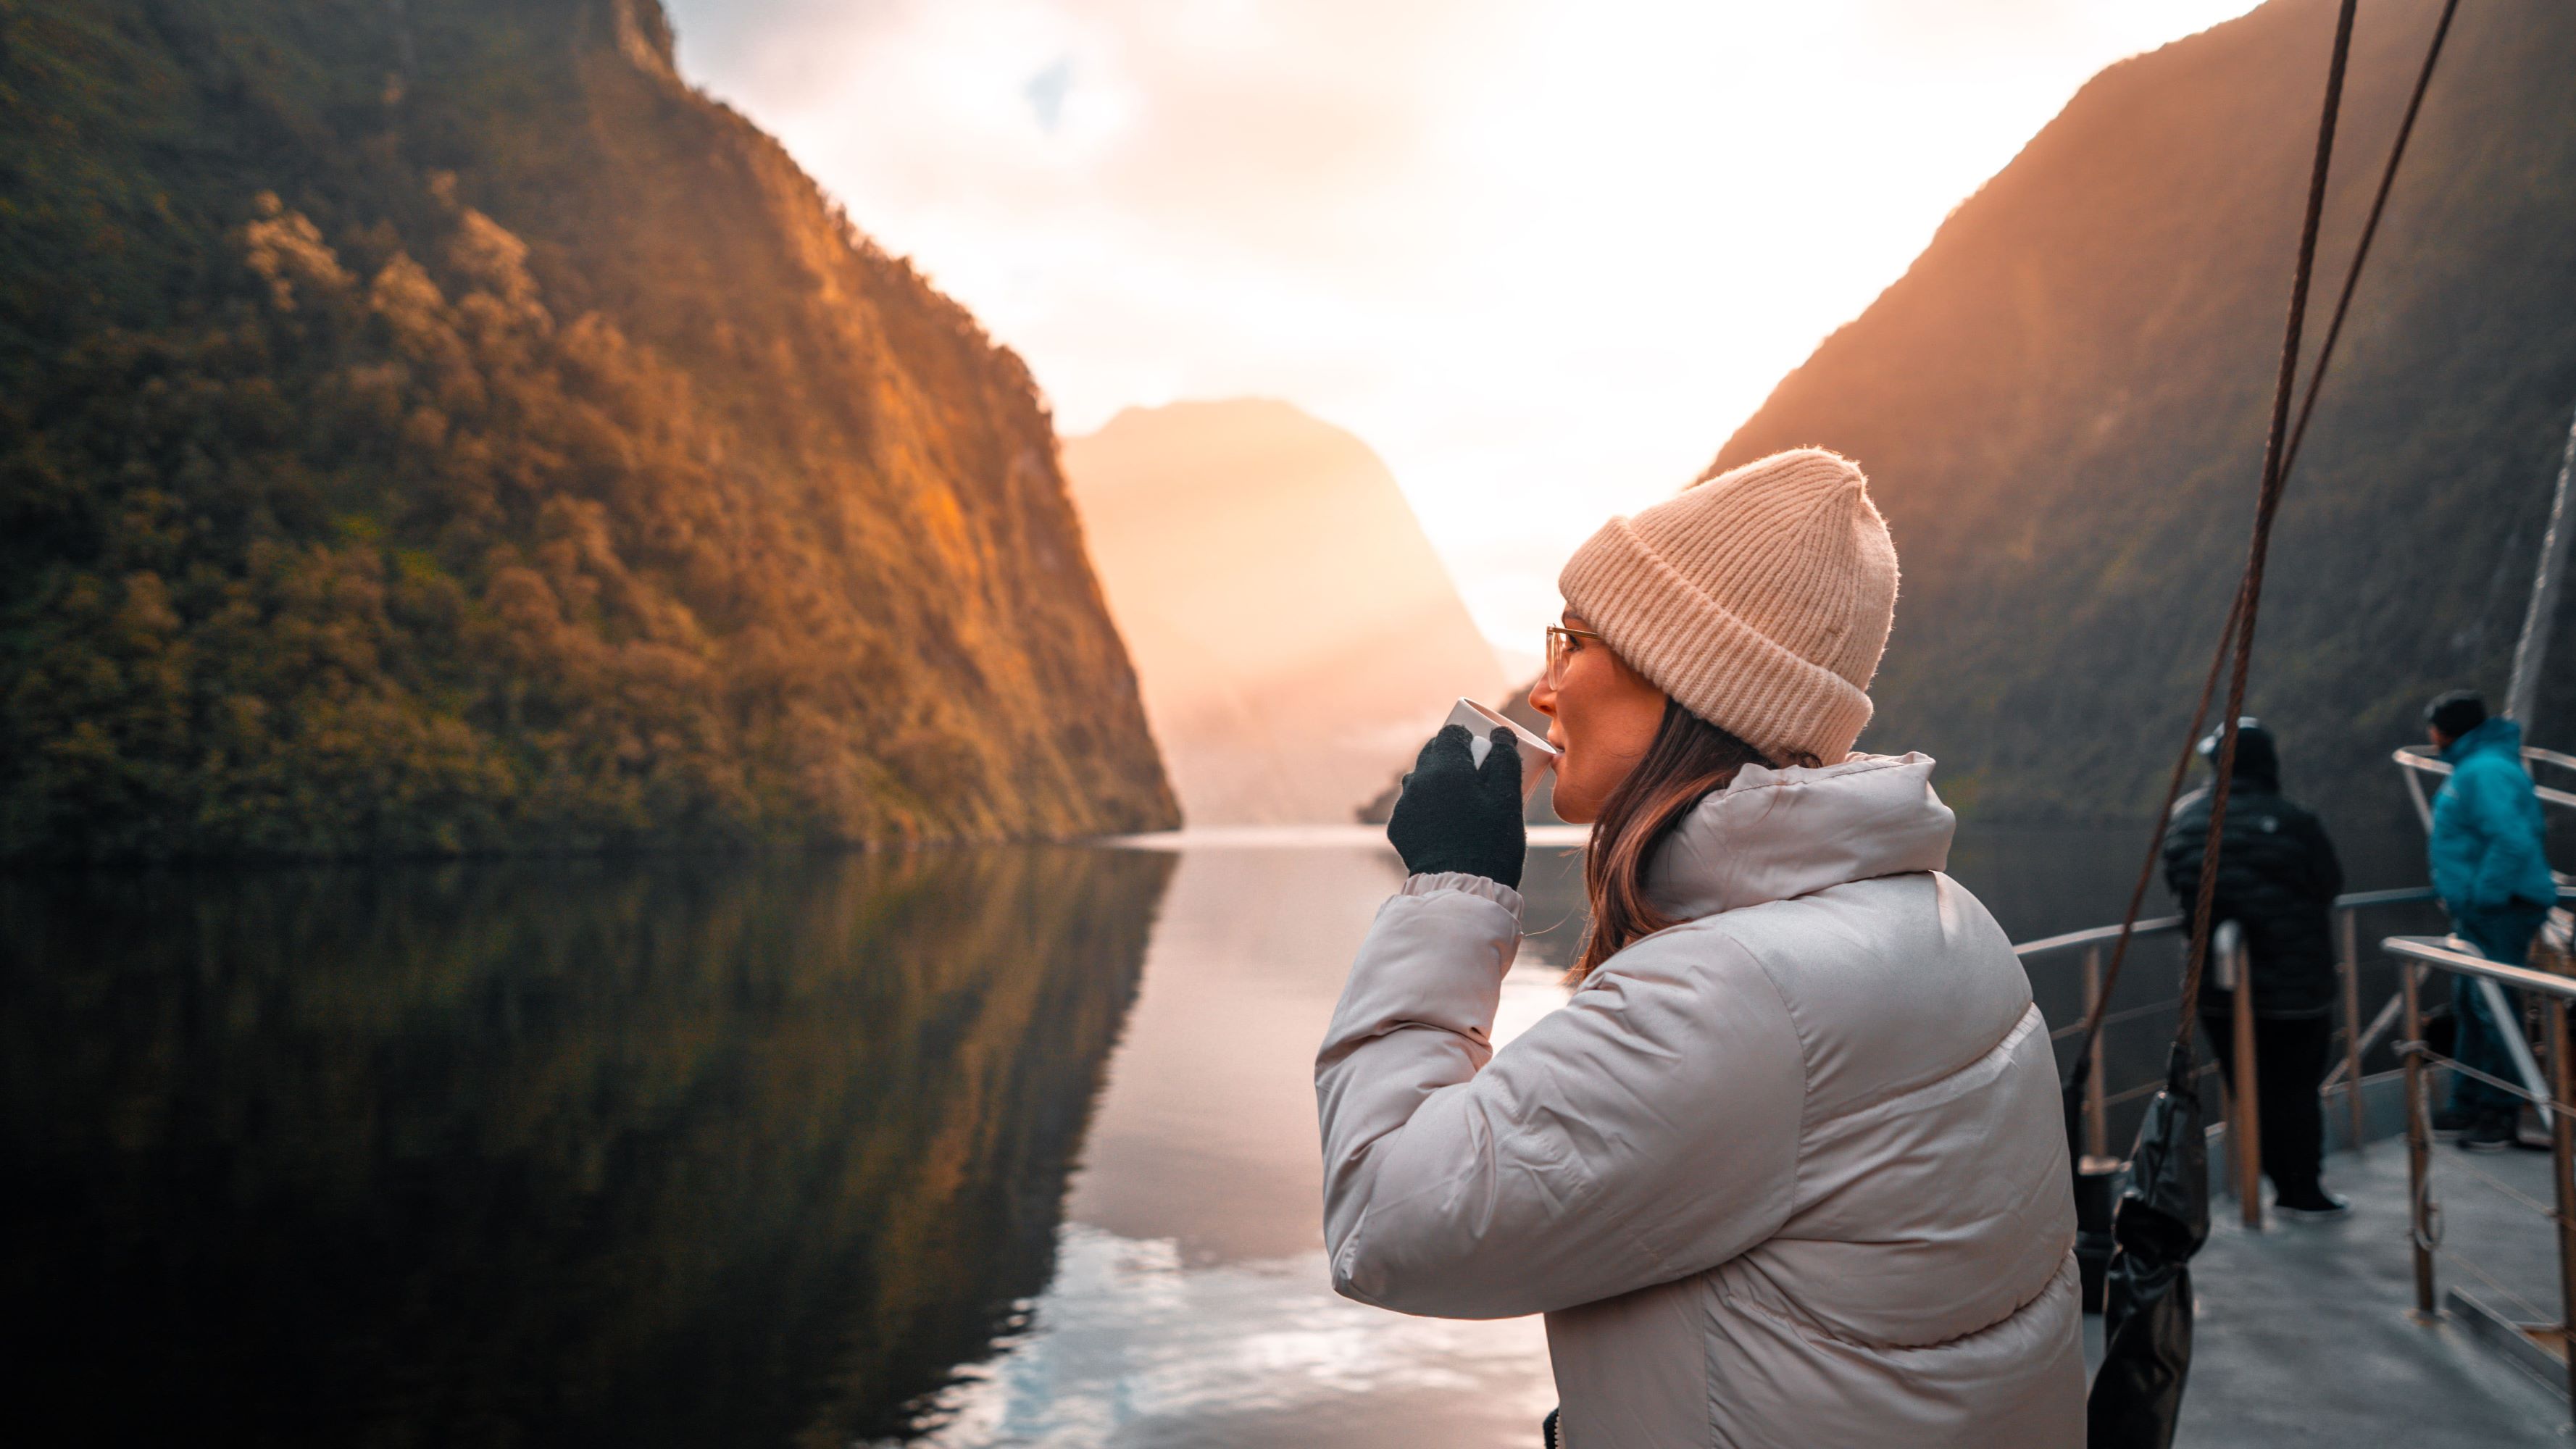 Women enjoys a hot drink outside in the winter sunrise at Doubtful Sound